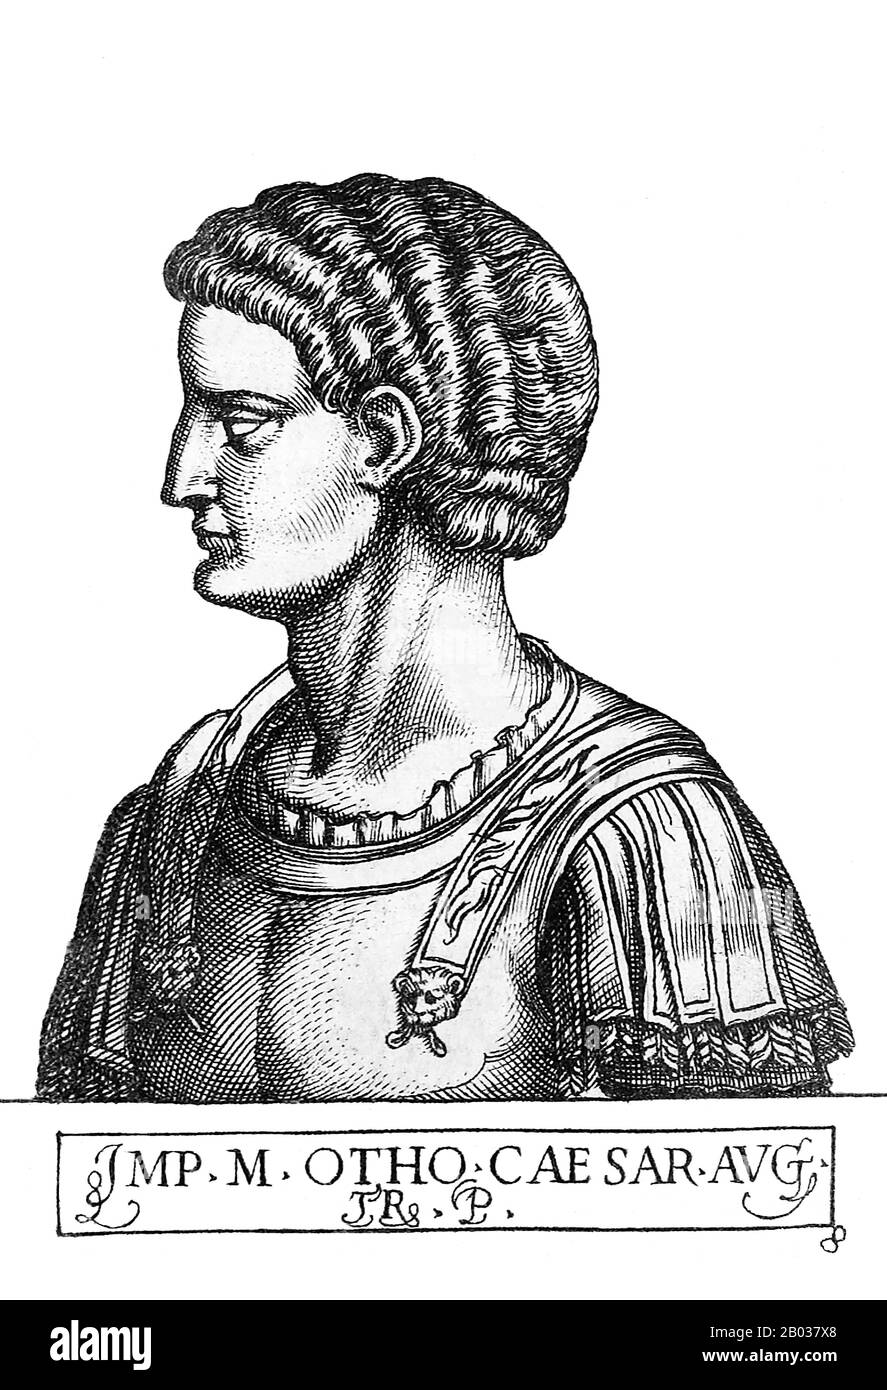 Born to a noble and ancient Etruscan lineage, Otho was one of the young nobles of Nero's court, said to be overly extravagant and reckless. His close friendship with Nero crumbled when his wife began an affair with the emperor and eventually divorced Otho, having Nero send Otho away to govern the distant province of Lusitania, where he would remain for ten years.  Otho followed Galba in his revolt against Nero, but his own personal ambitions led him to betray and overthrow Emperor Galba, purchasing the services of the Praetorian Guard and killing Galba. Otho was declared emperor, but his reign Stock Photo